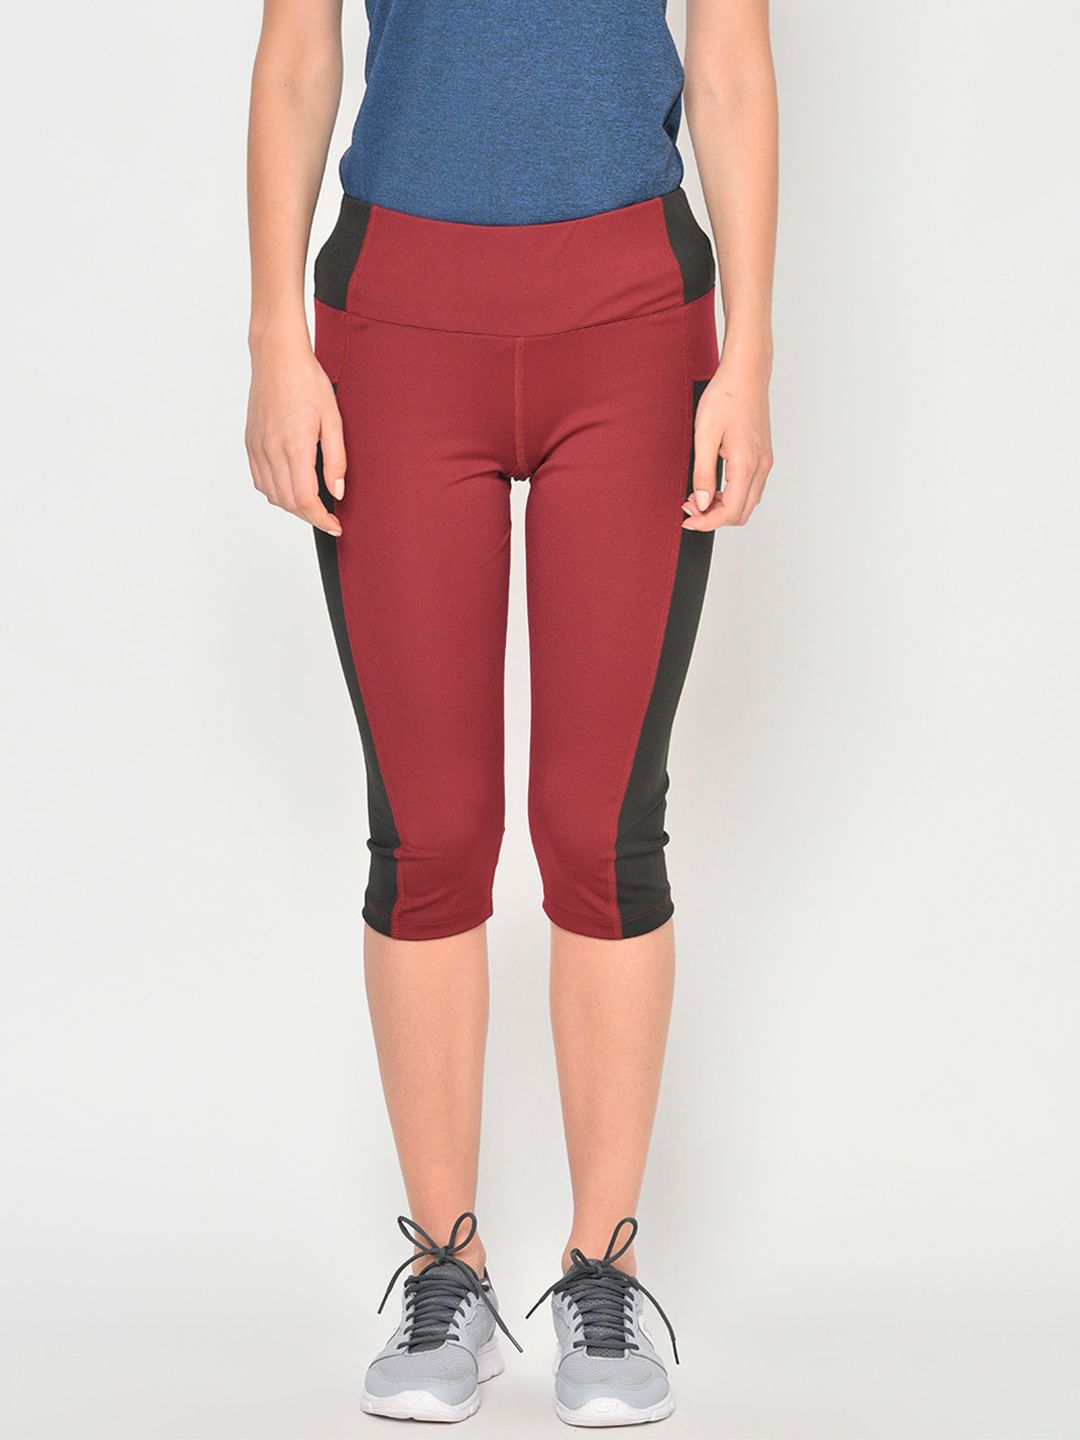 Chkokko Women Maroon Solid Gym Tights Price in India